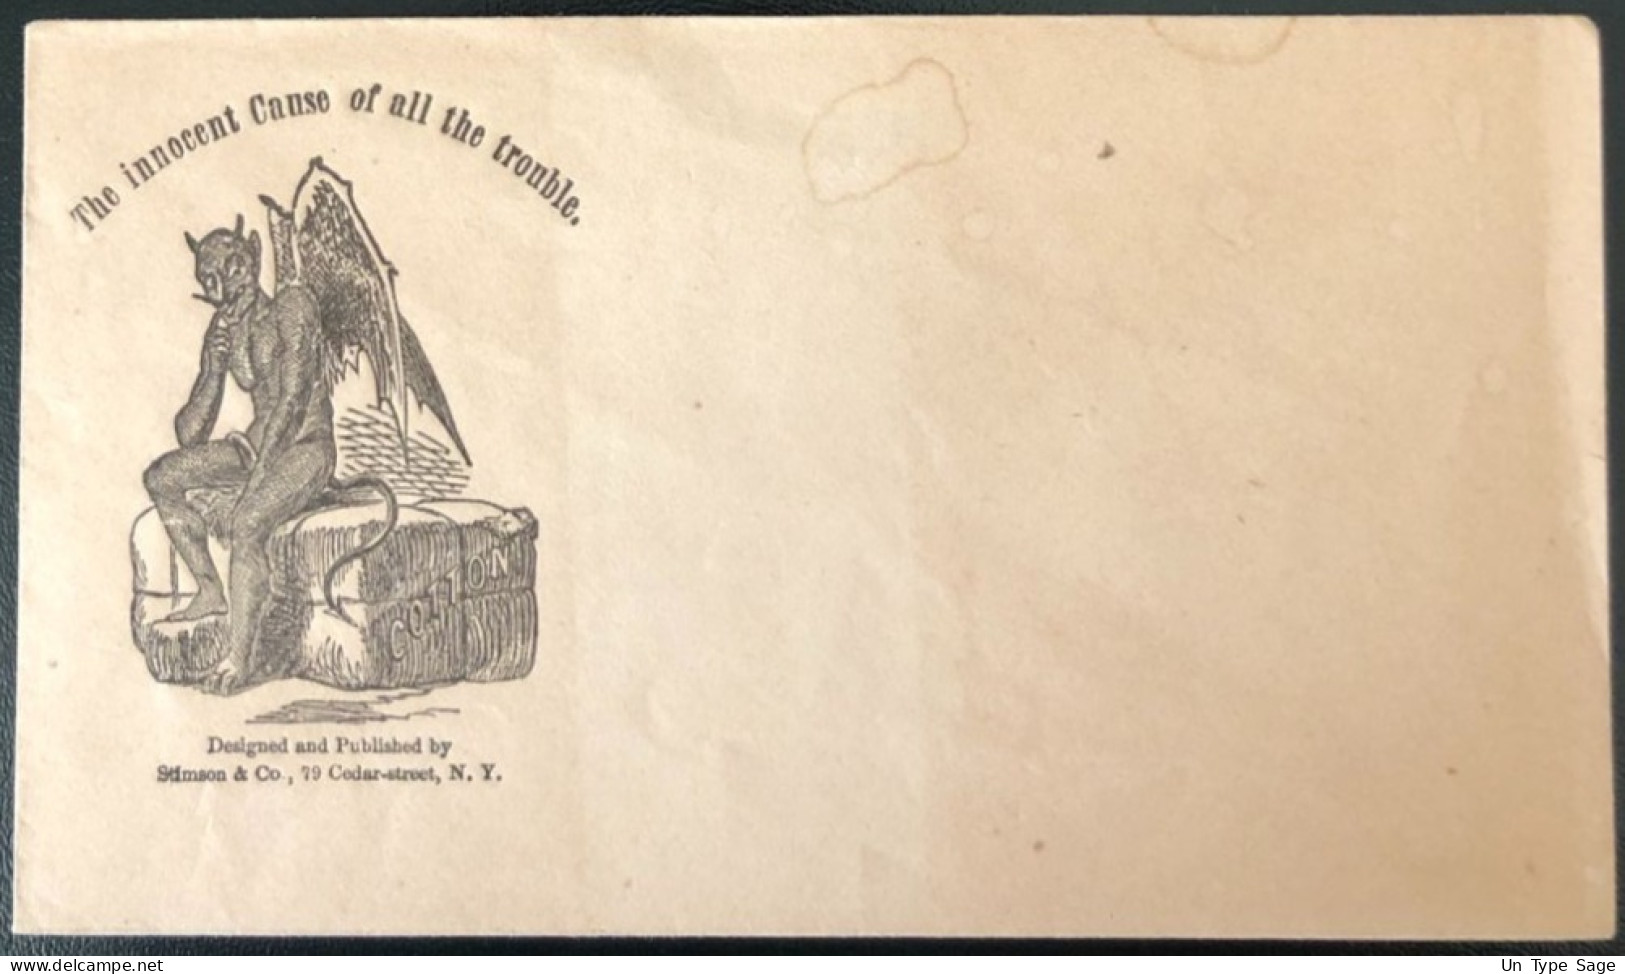 U.S.A, Civil War, Patriotic Cover - "The Innocent Cause Of All The Trouble" - Unused - (C448) - Marcofilie